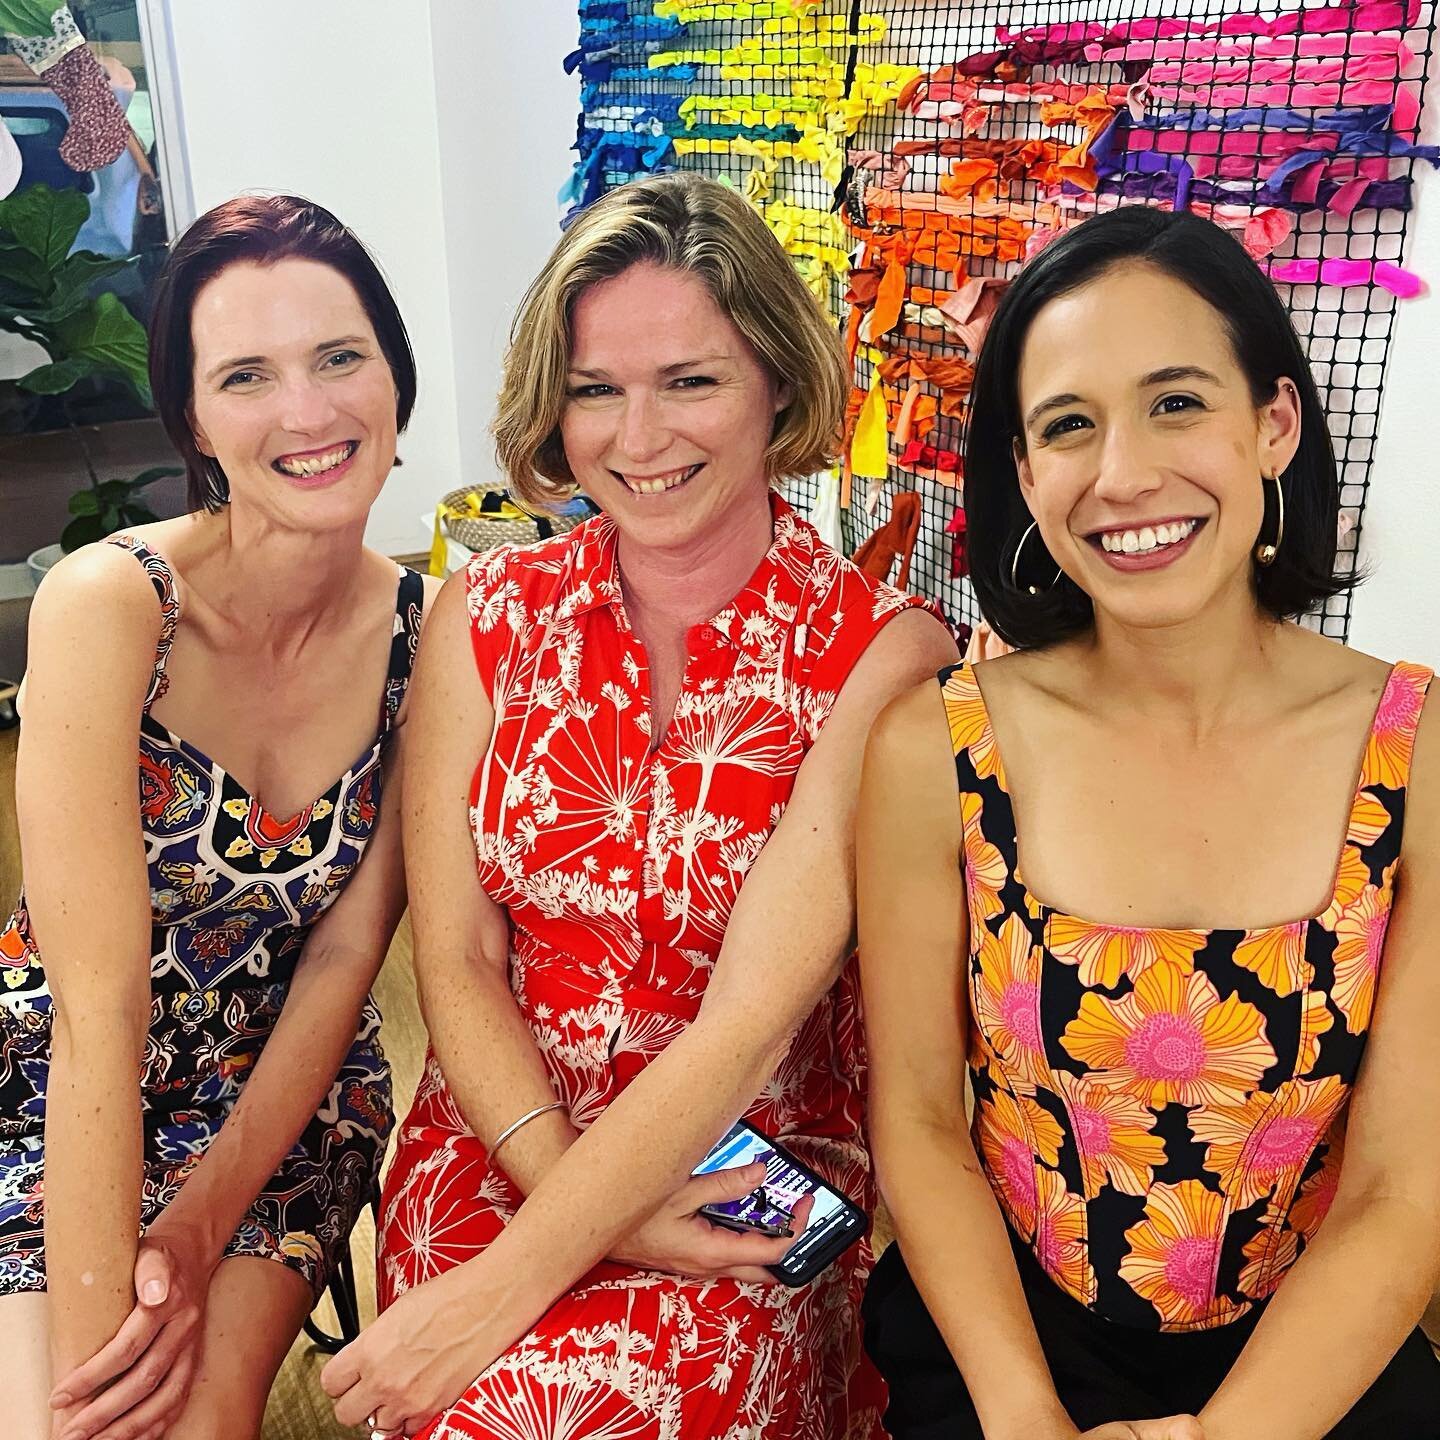 Somehow I have managed to find two women who sometimes wear brighter dresses than me! 🤣 Thanks for the very fun chat 😜Mariana and Danielle 😘

#xmasparty #christmasparty #christmasoutfit #christmasfun #artstudio #creativepeople #creatives #creative